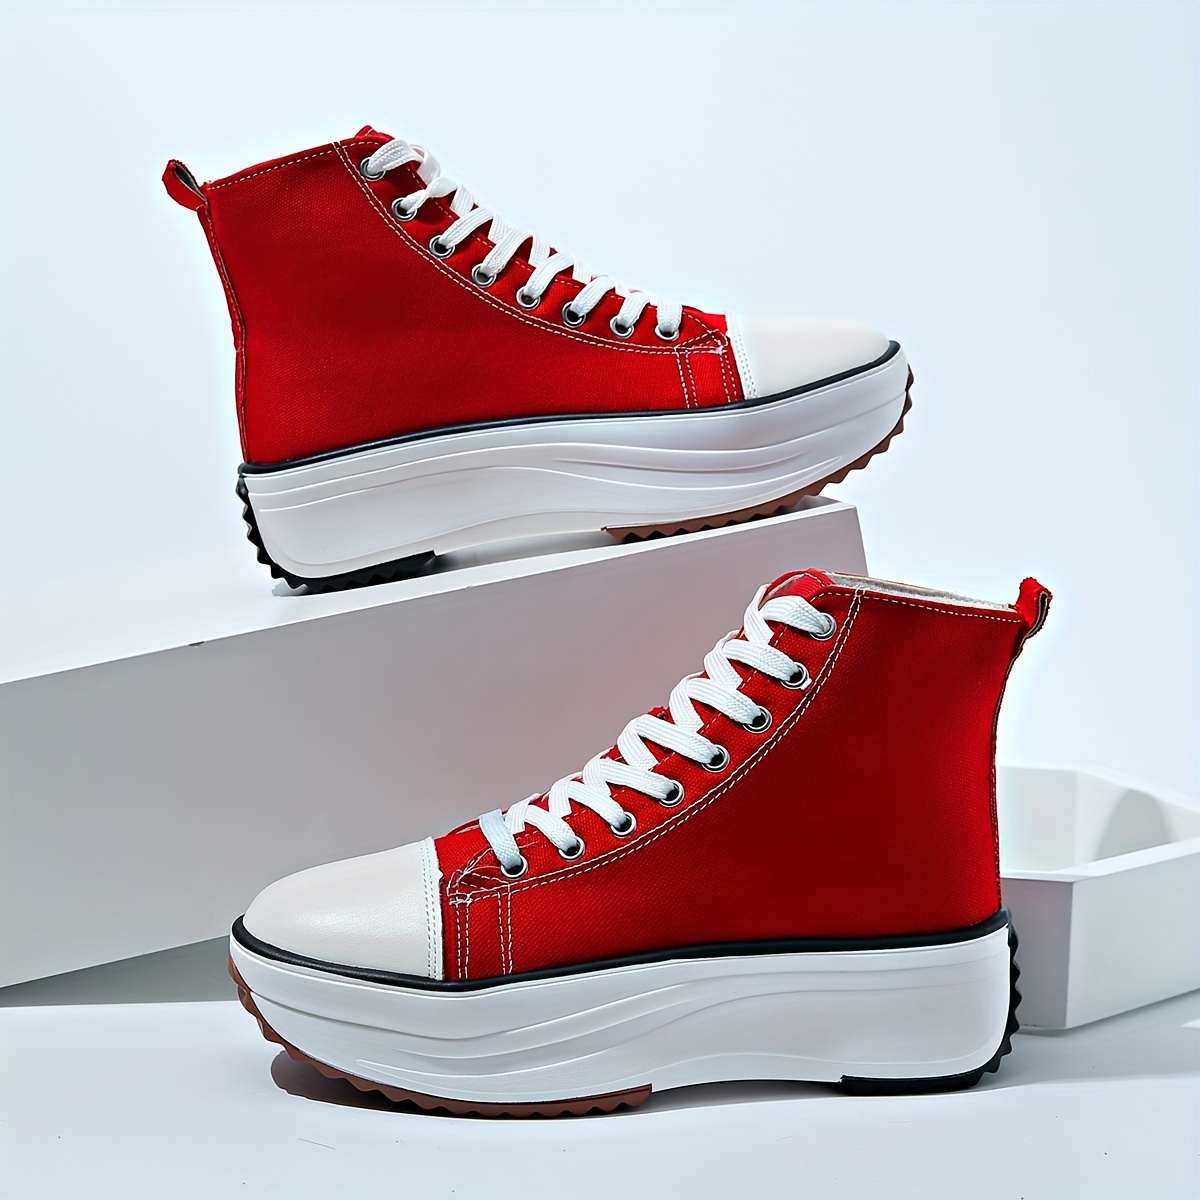 Red Shoes: High Top, Low Top & Platform Sneakers.